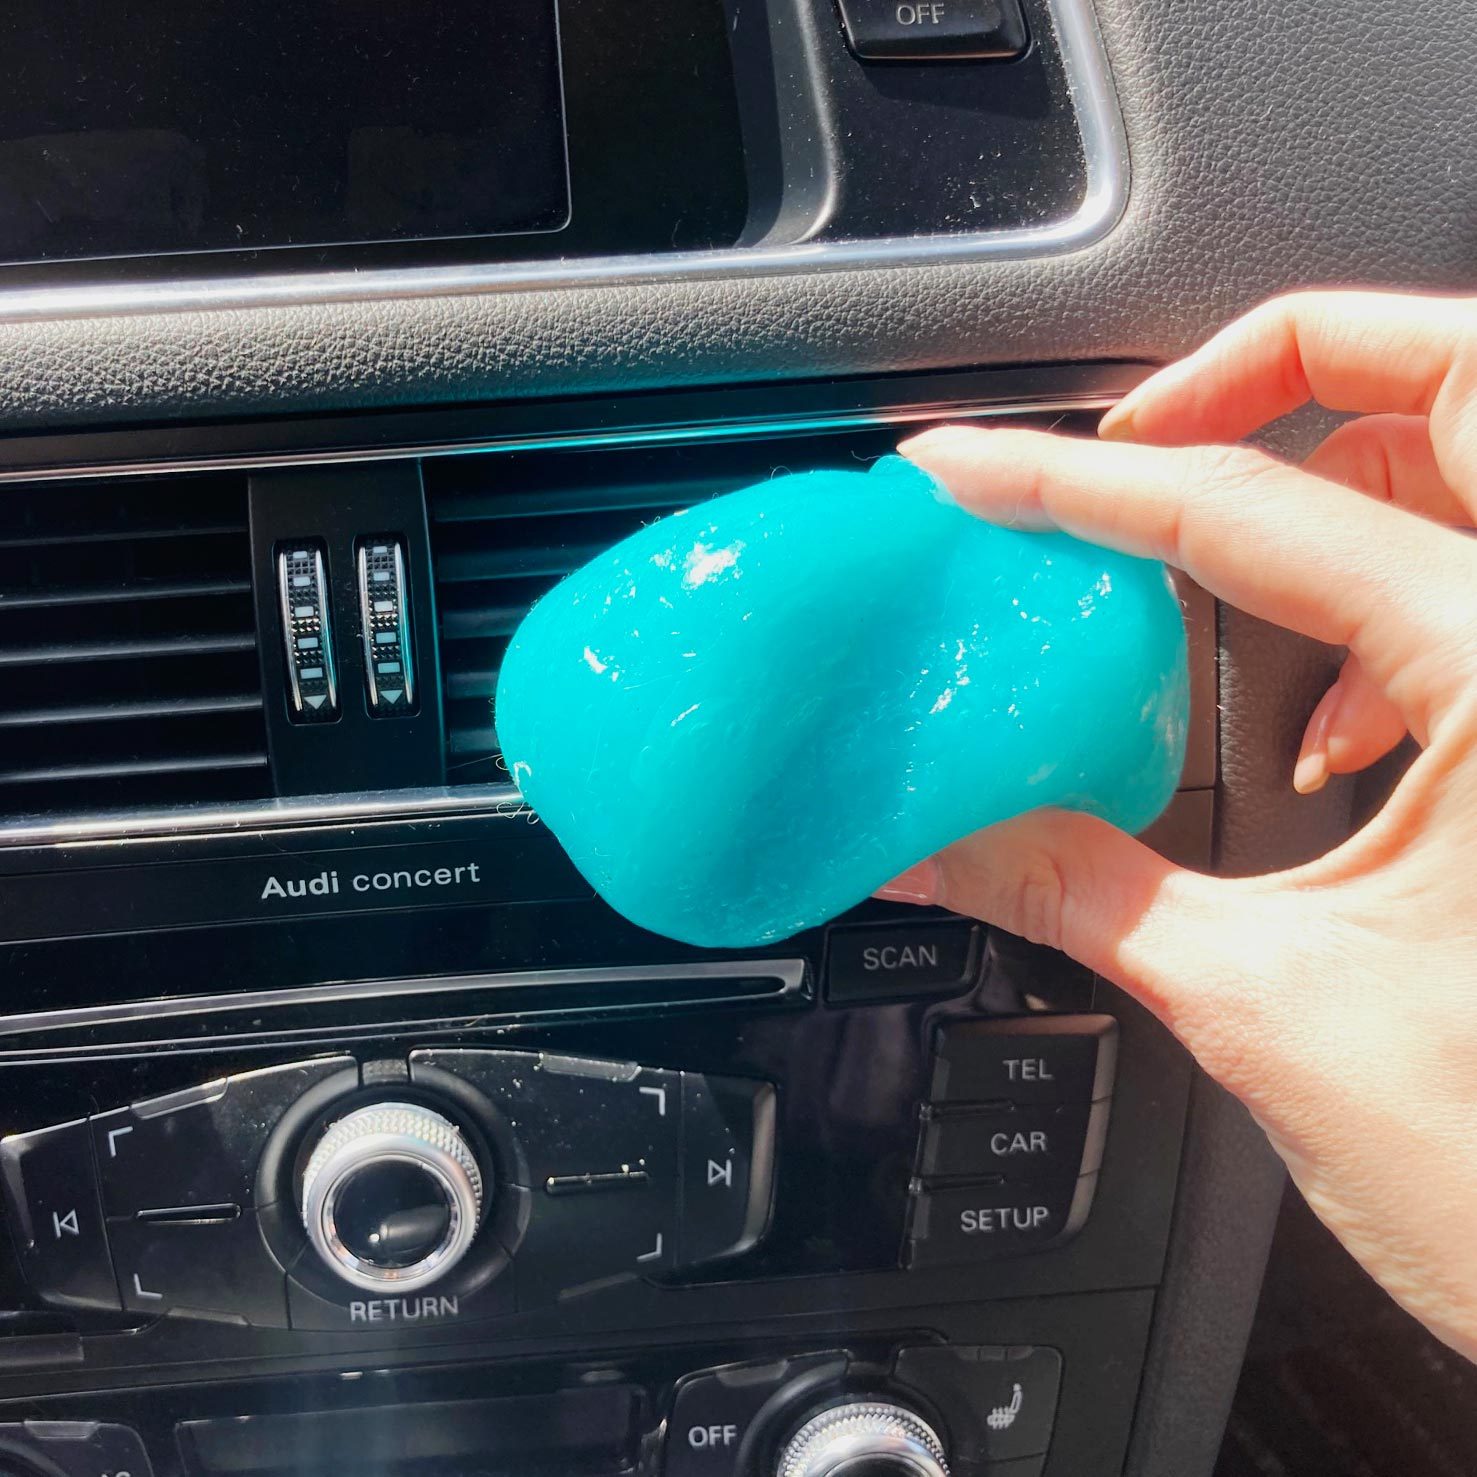 This Car Putty Cleaner Is Going Viral for Making Cleaning Fun